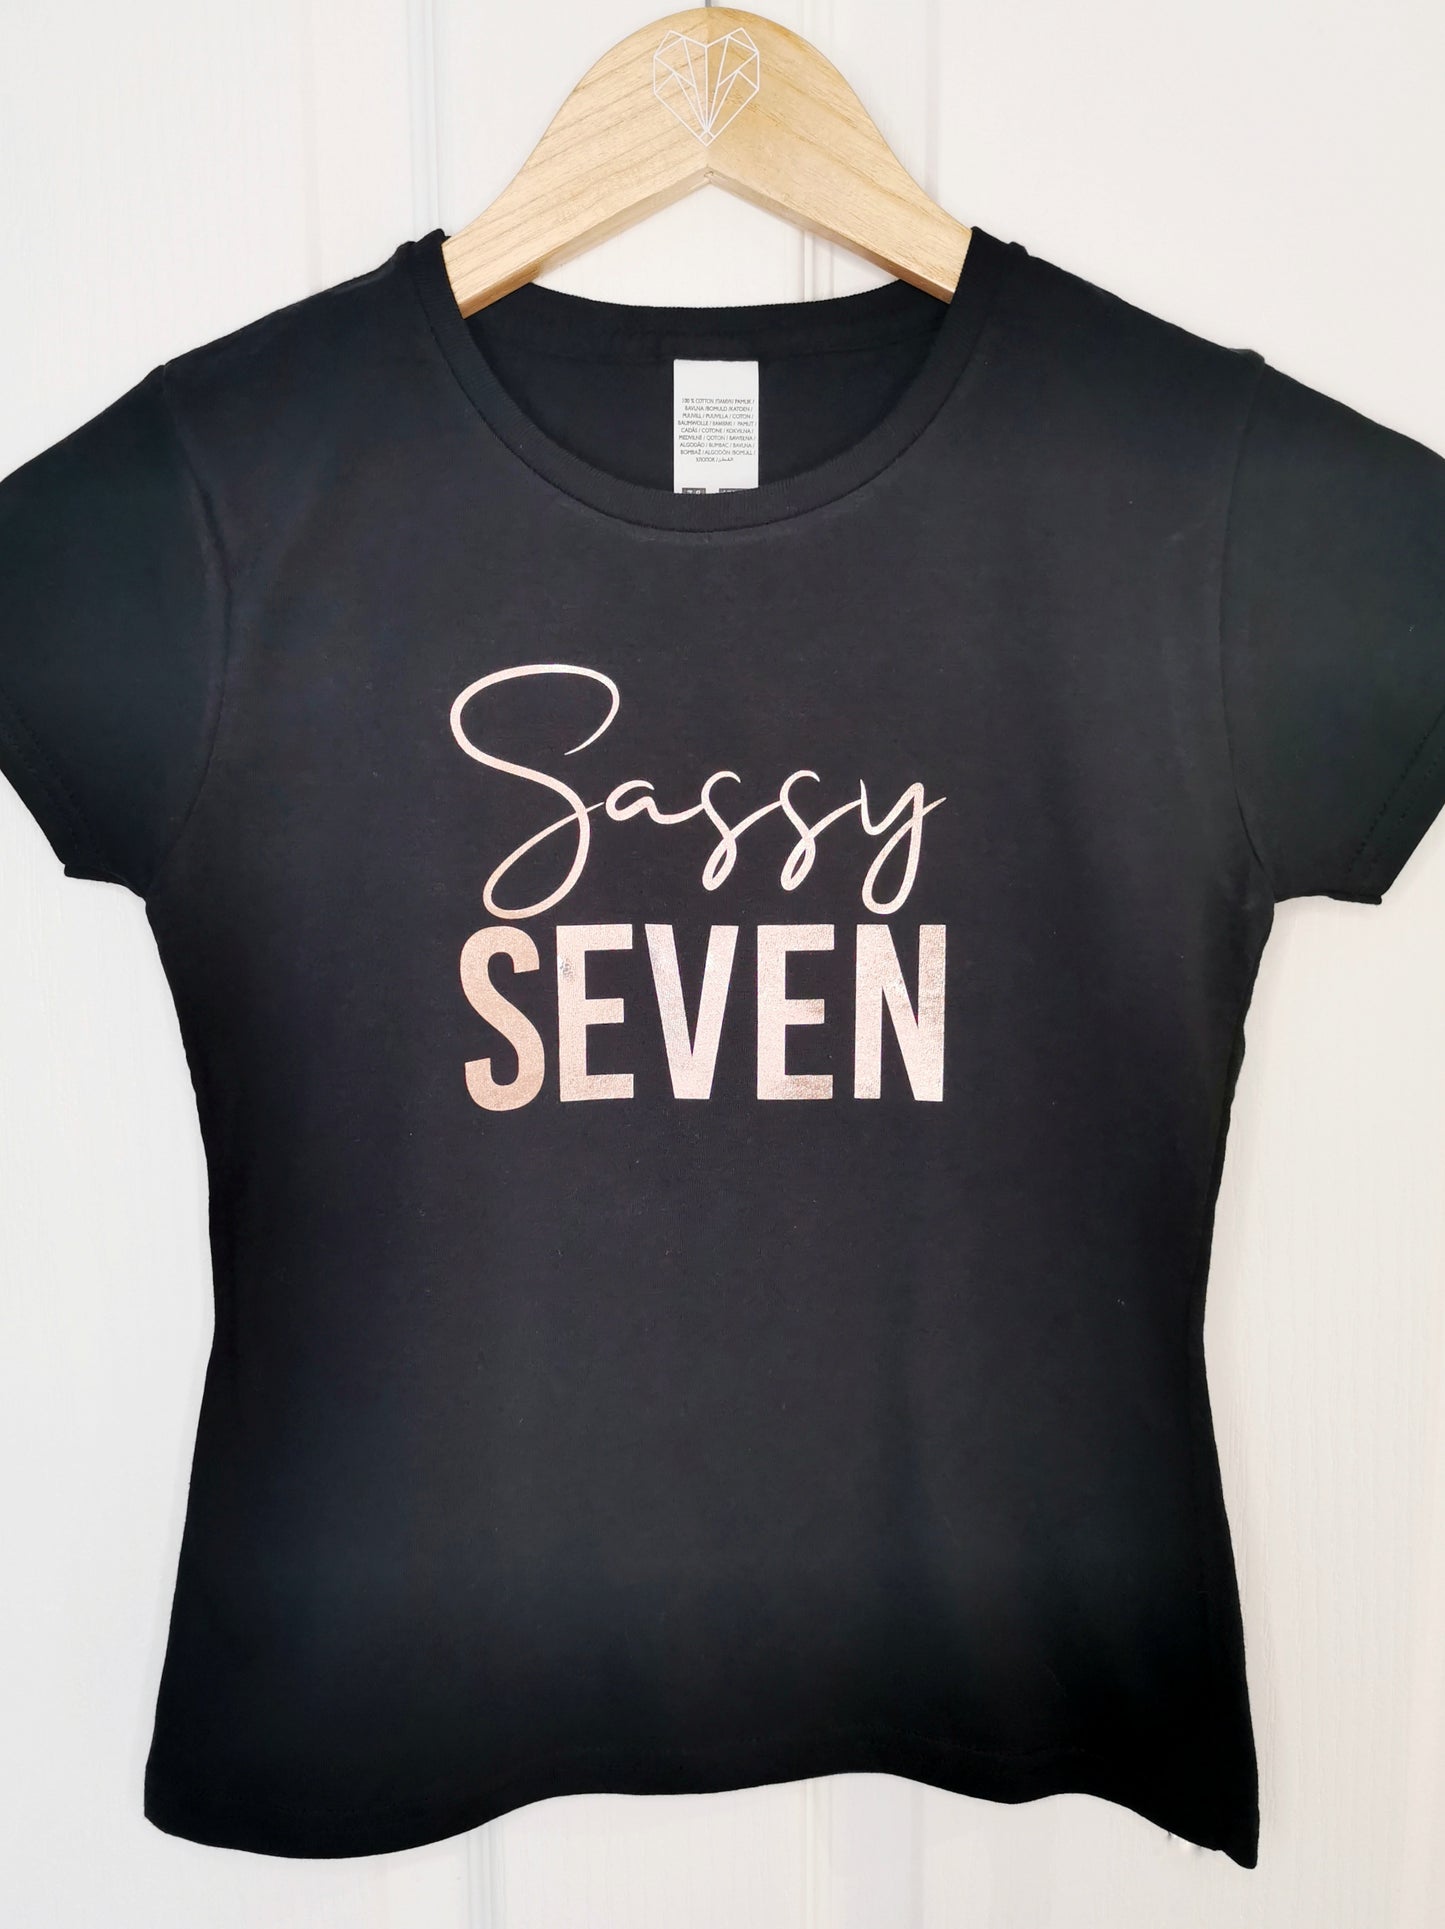 Sassy Seven T-shirt – Personalised clothing made with love – Fox